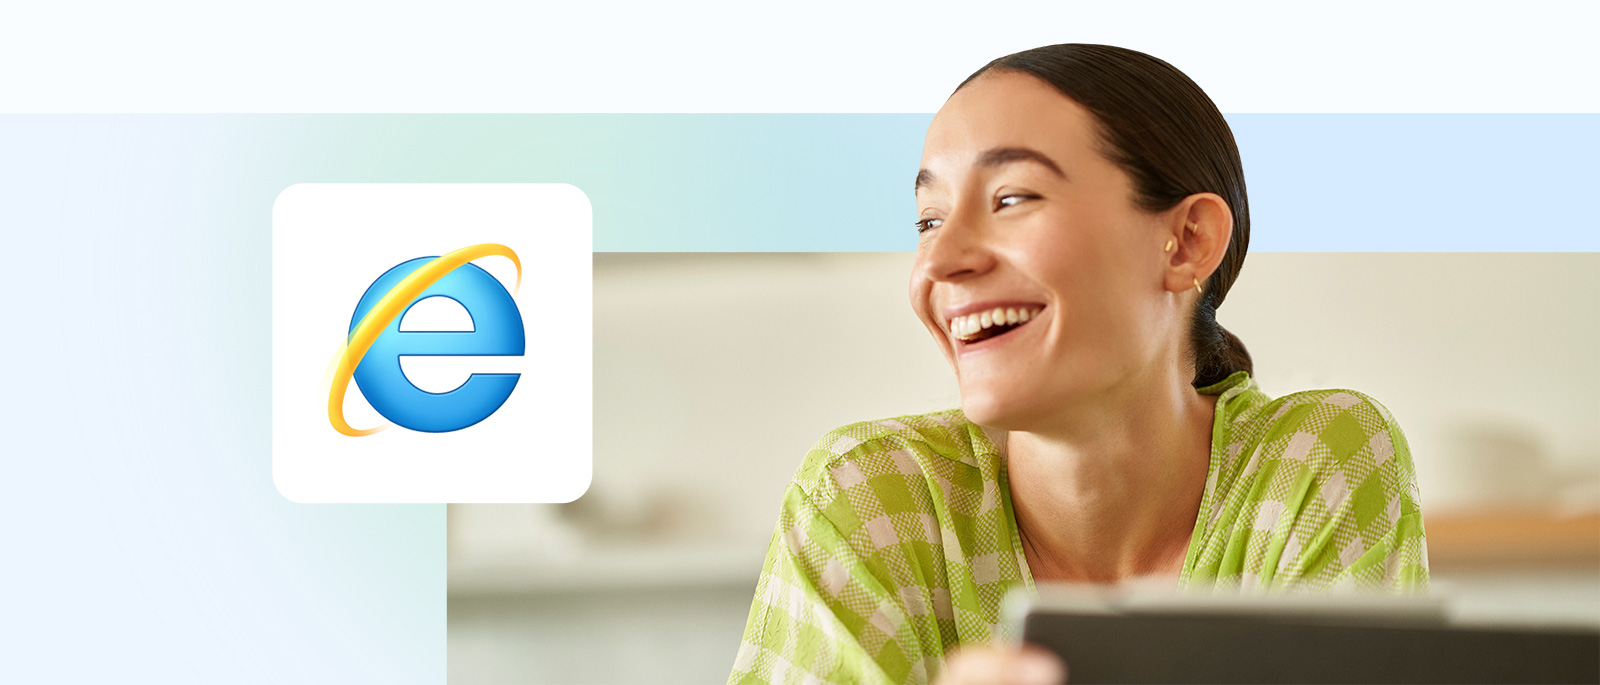 Person sitting in front of a laptop smiling with the Internet Explorer icon in the foreground.